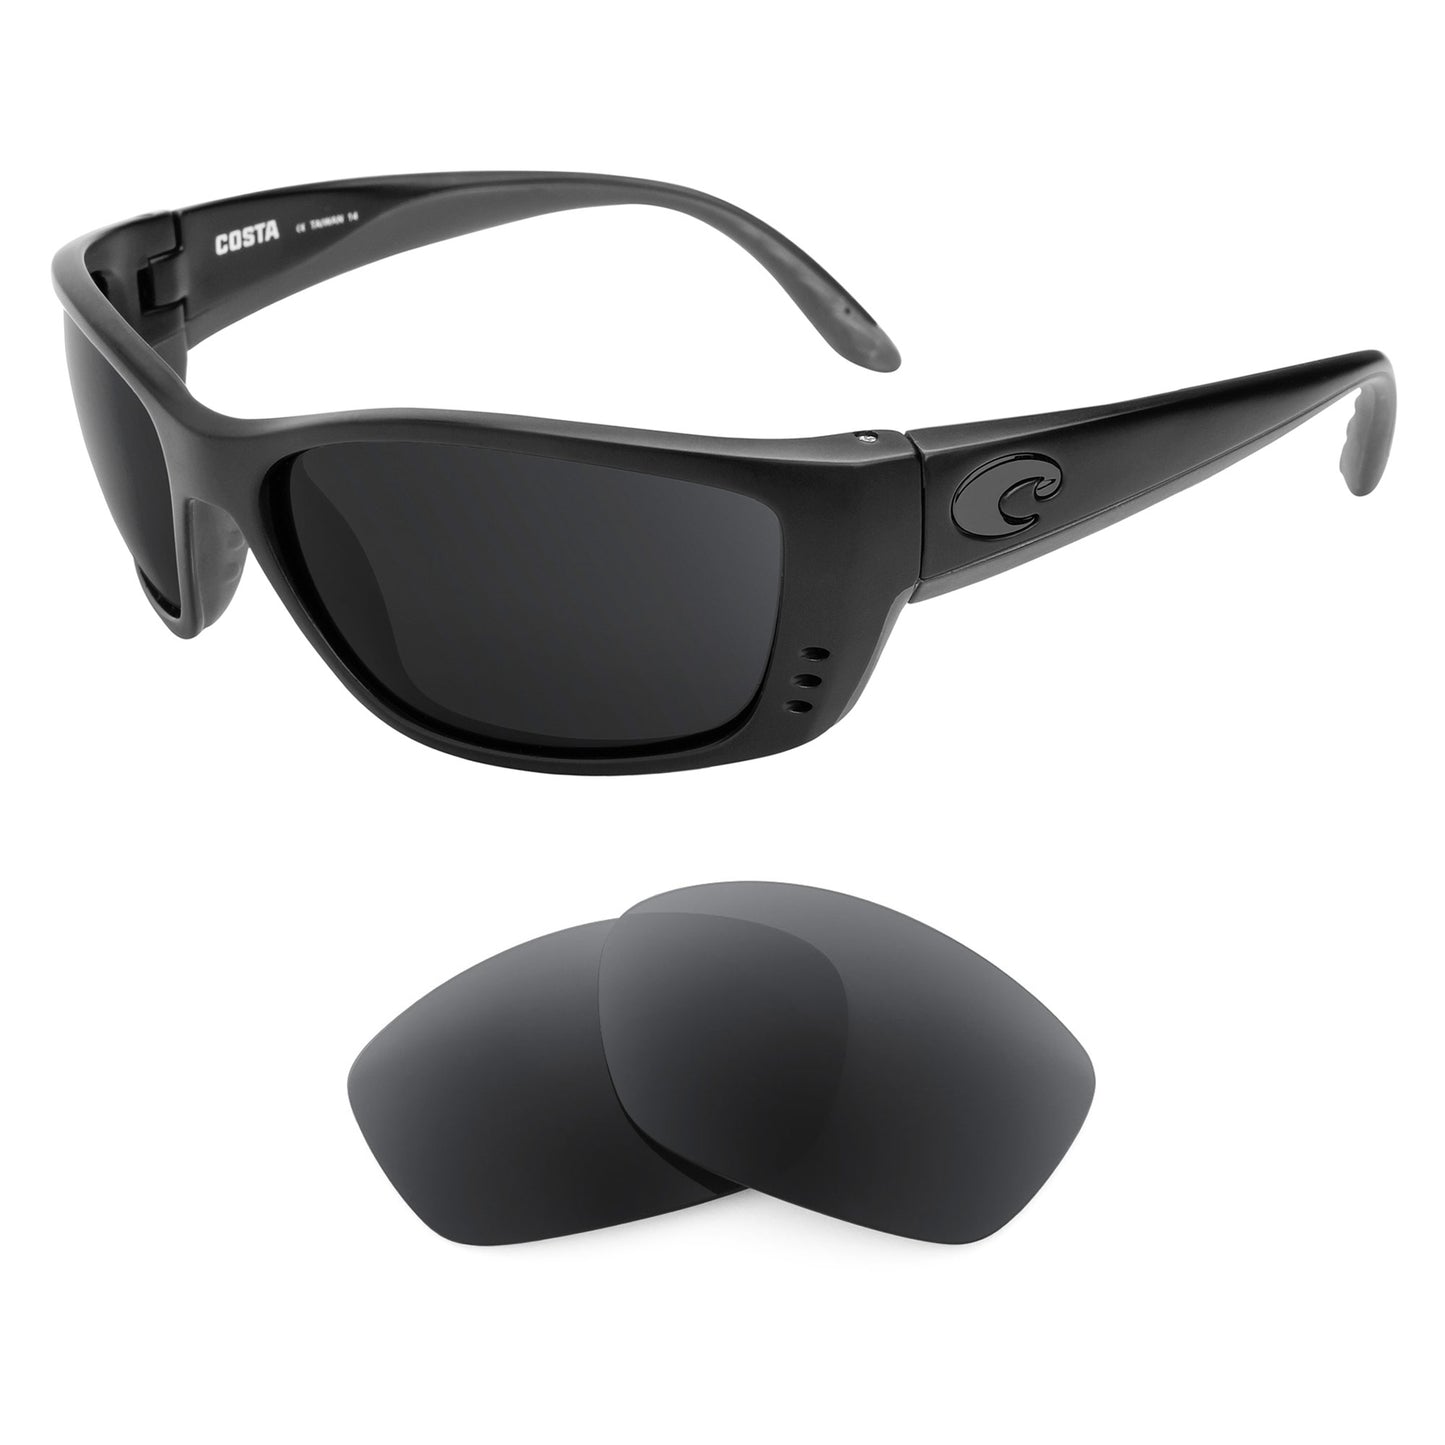 Costa Fisch sunglasses with replacement lenses